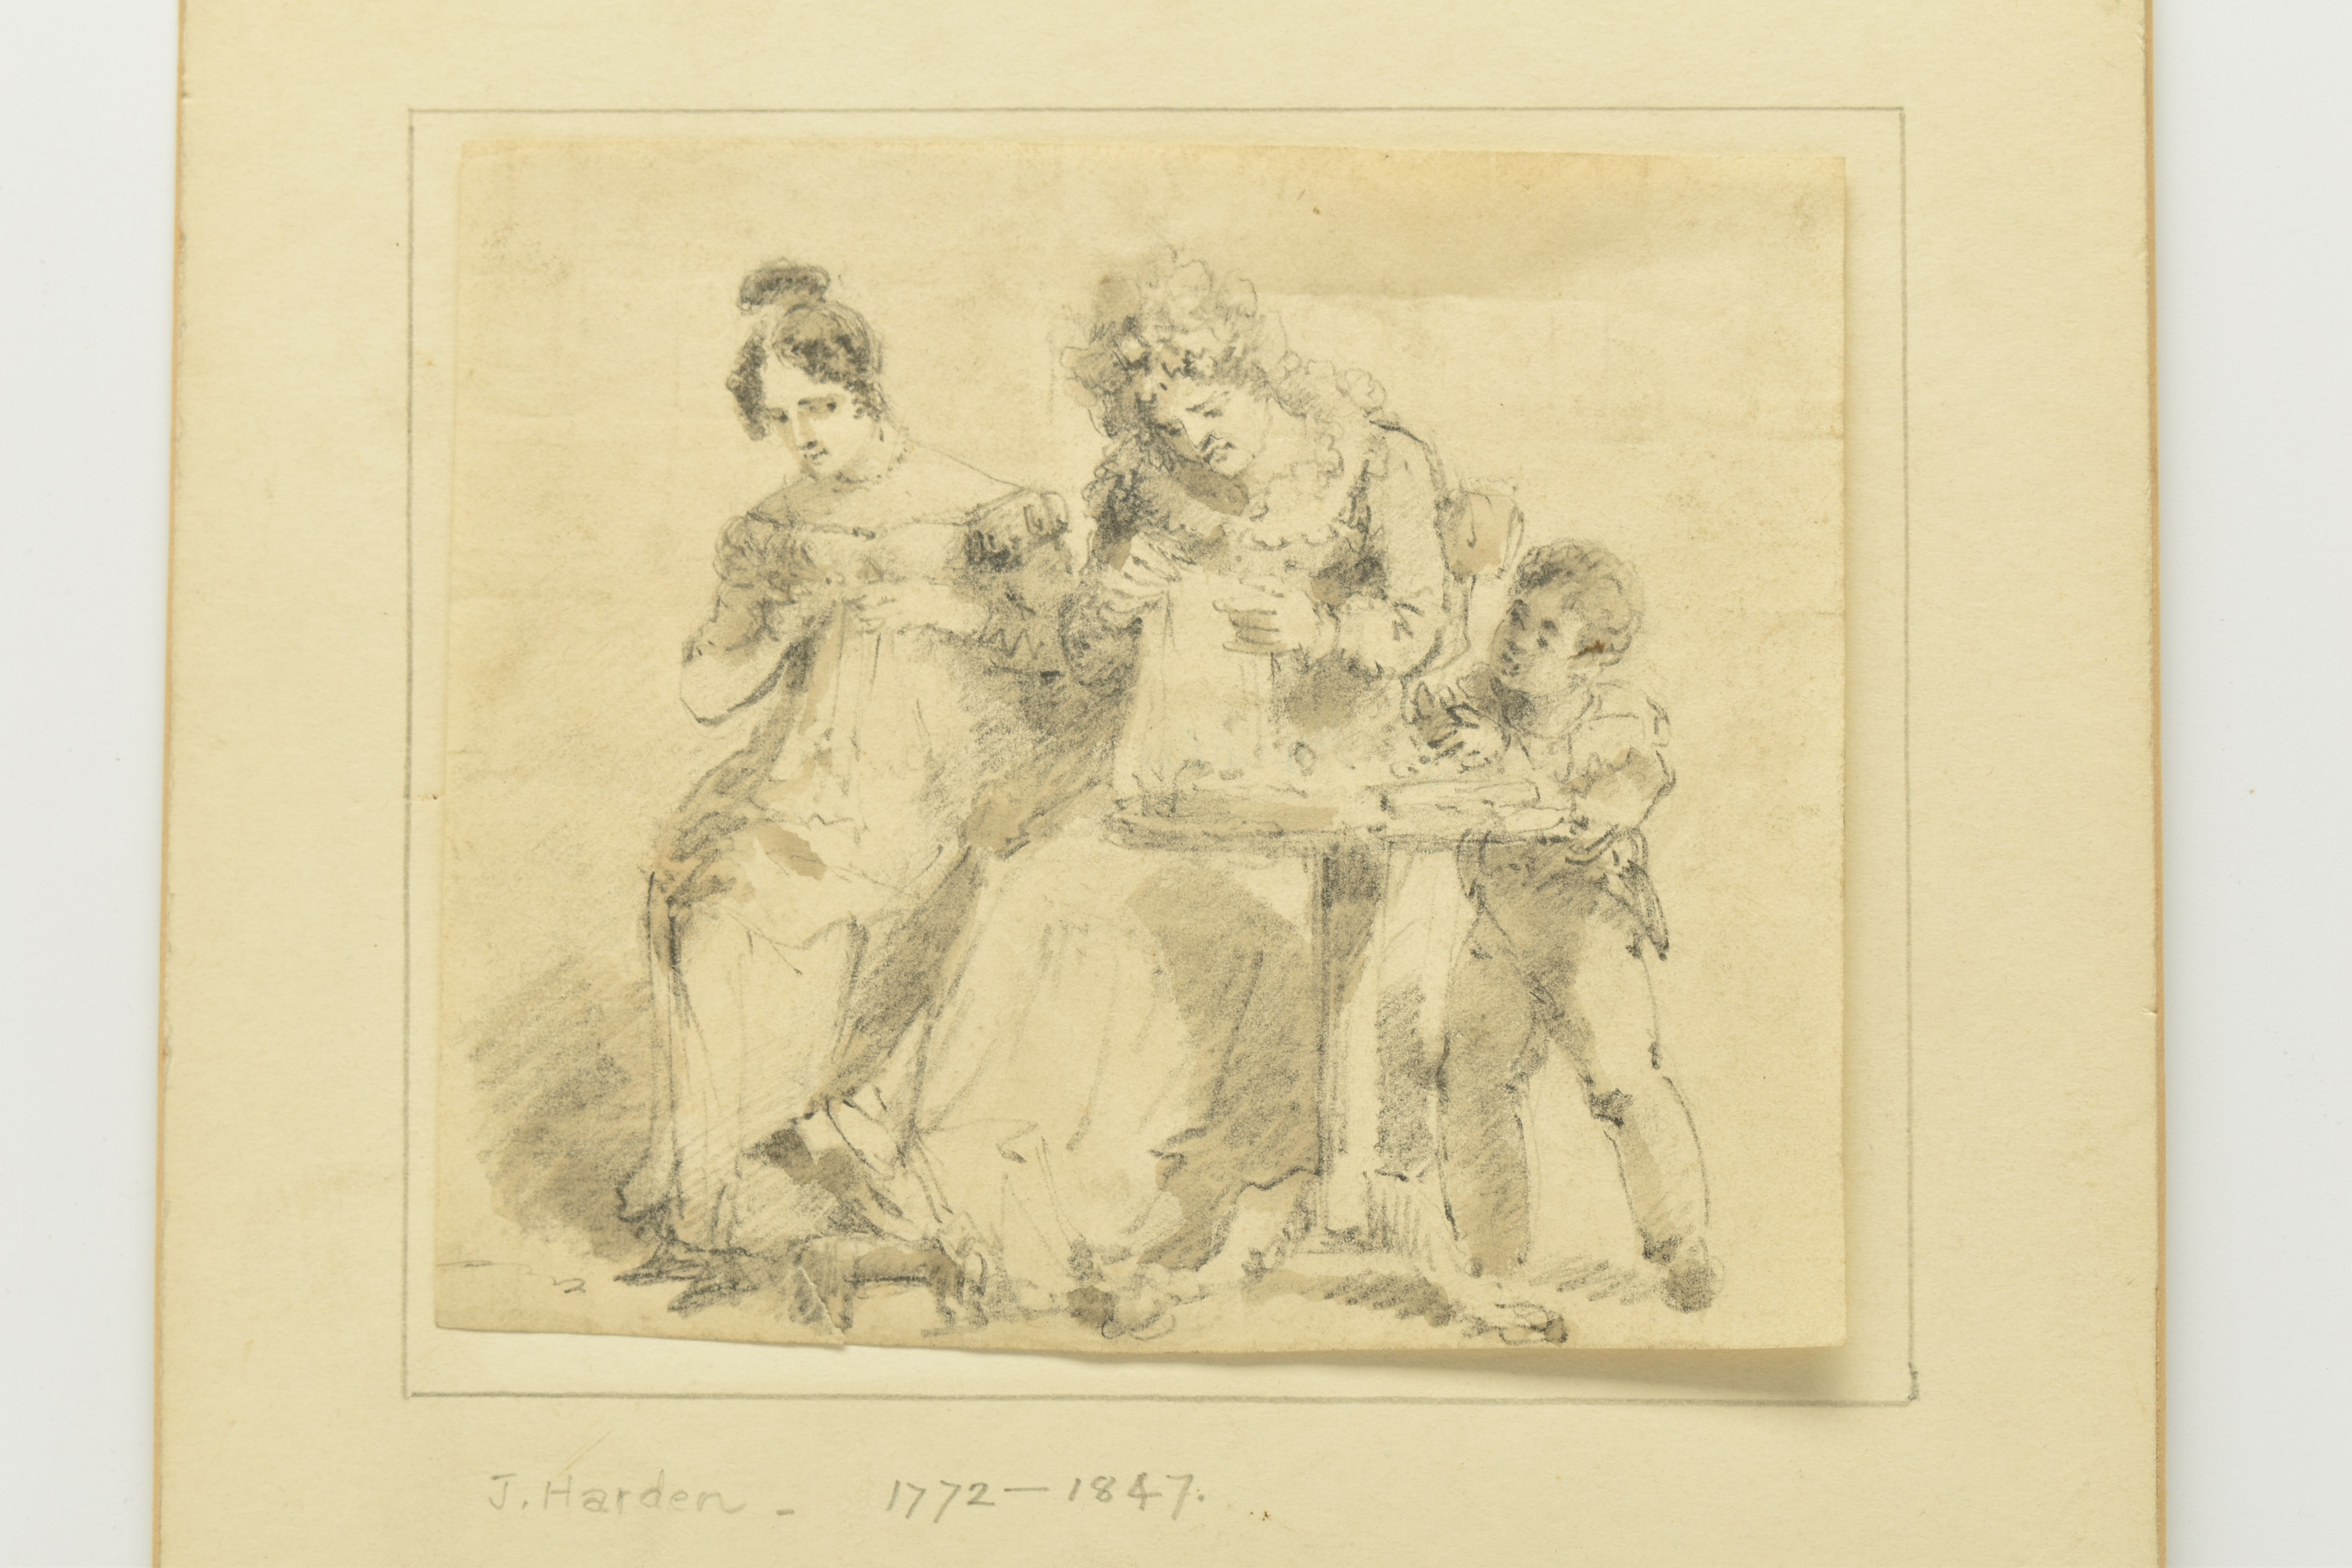 CIRCLE OF JOHN HARDEN (1772-1847) A SKETCH OF A FAMILY GROUP, a small boy stands beside two female - Image 2 of 6